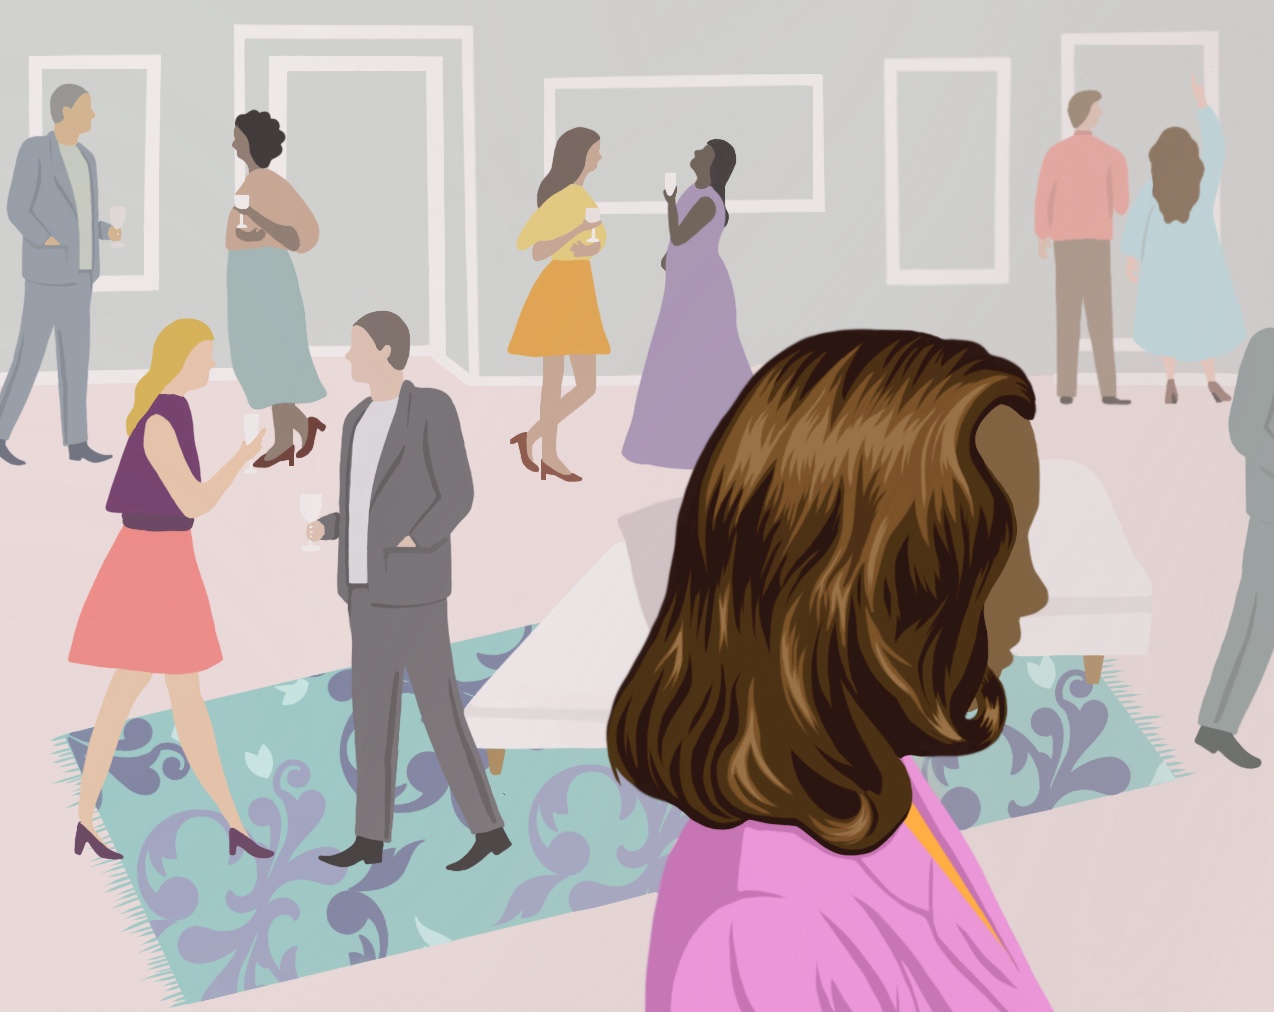 Illustration depicting a networking event where a woman stands alone in the foreground.